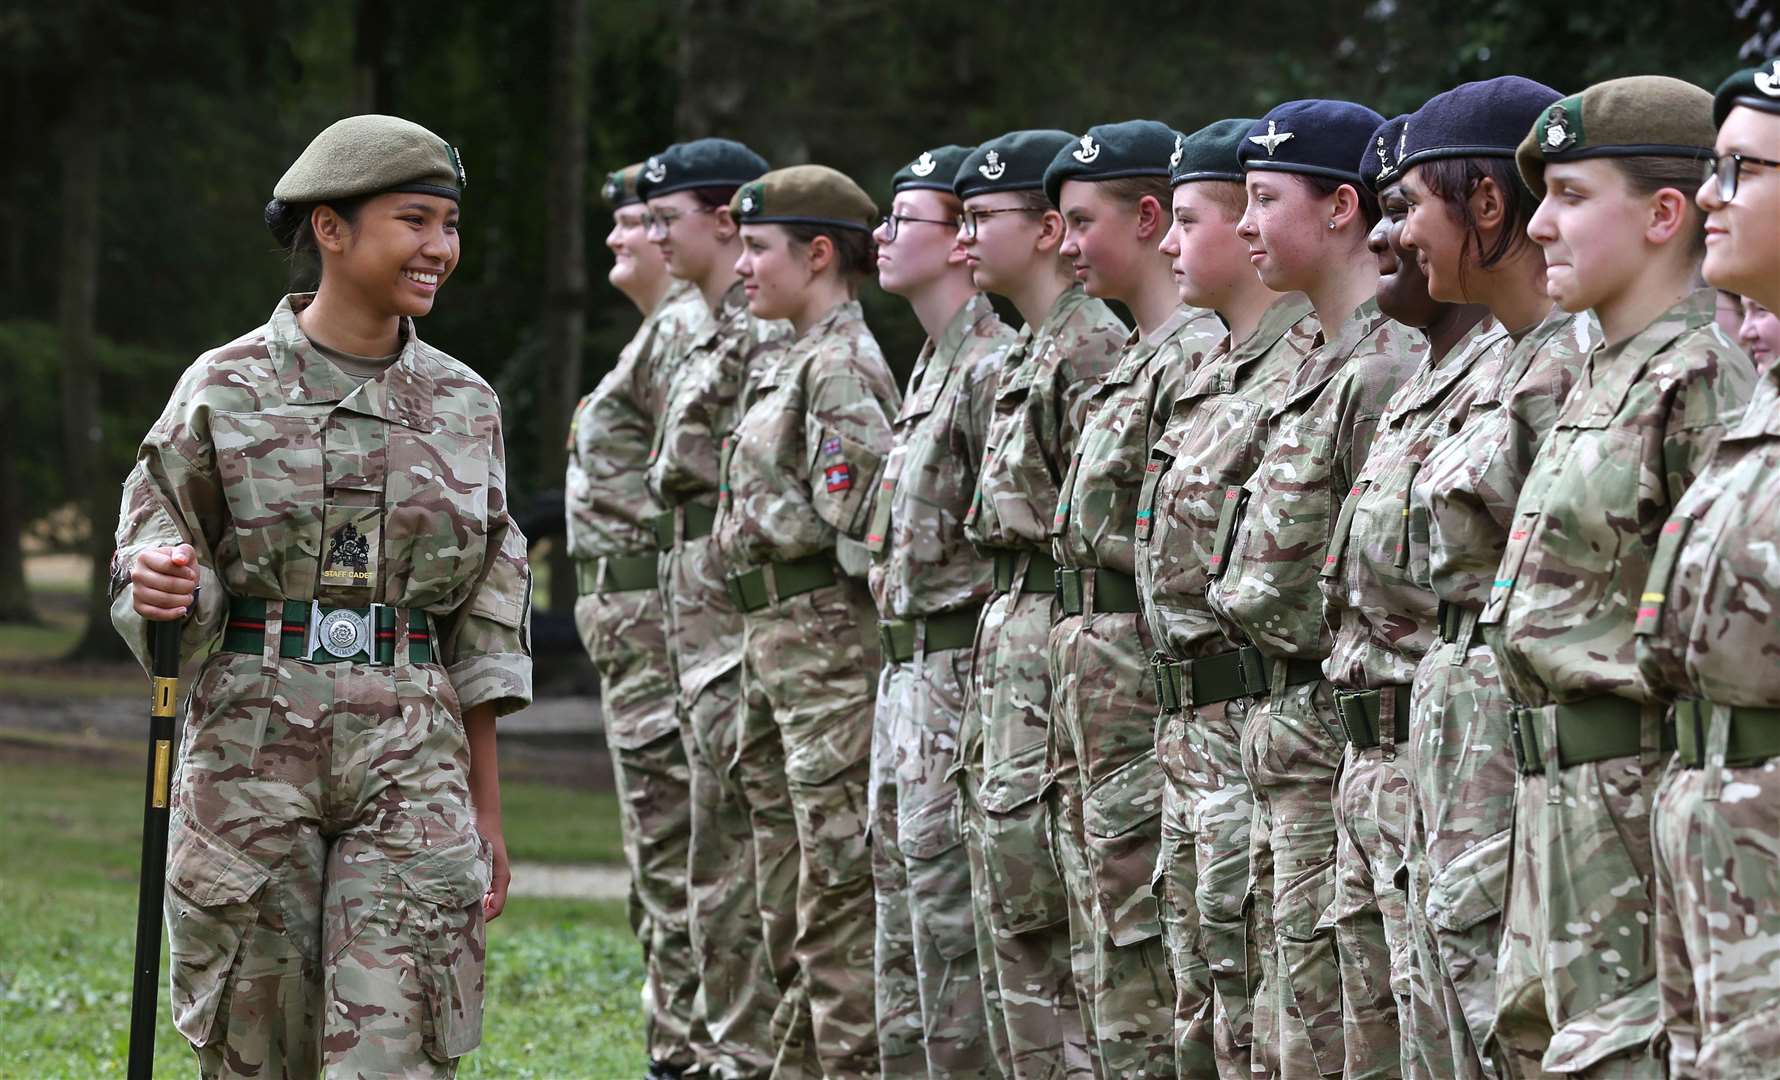 Regimental Sergeant Major Ashanti Mai Holden inspects the cadets in the Northallerton Detachment (Reserve Forces’ and Cadets’ Associations/PA)